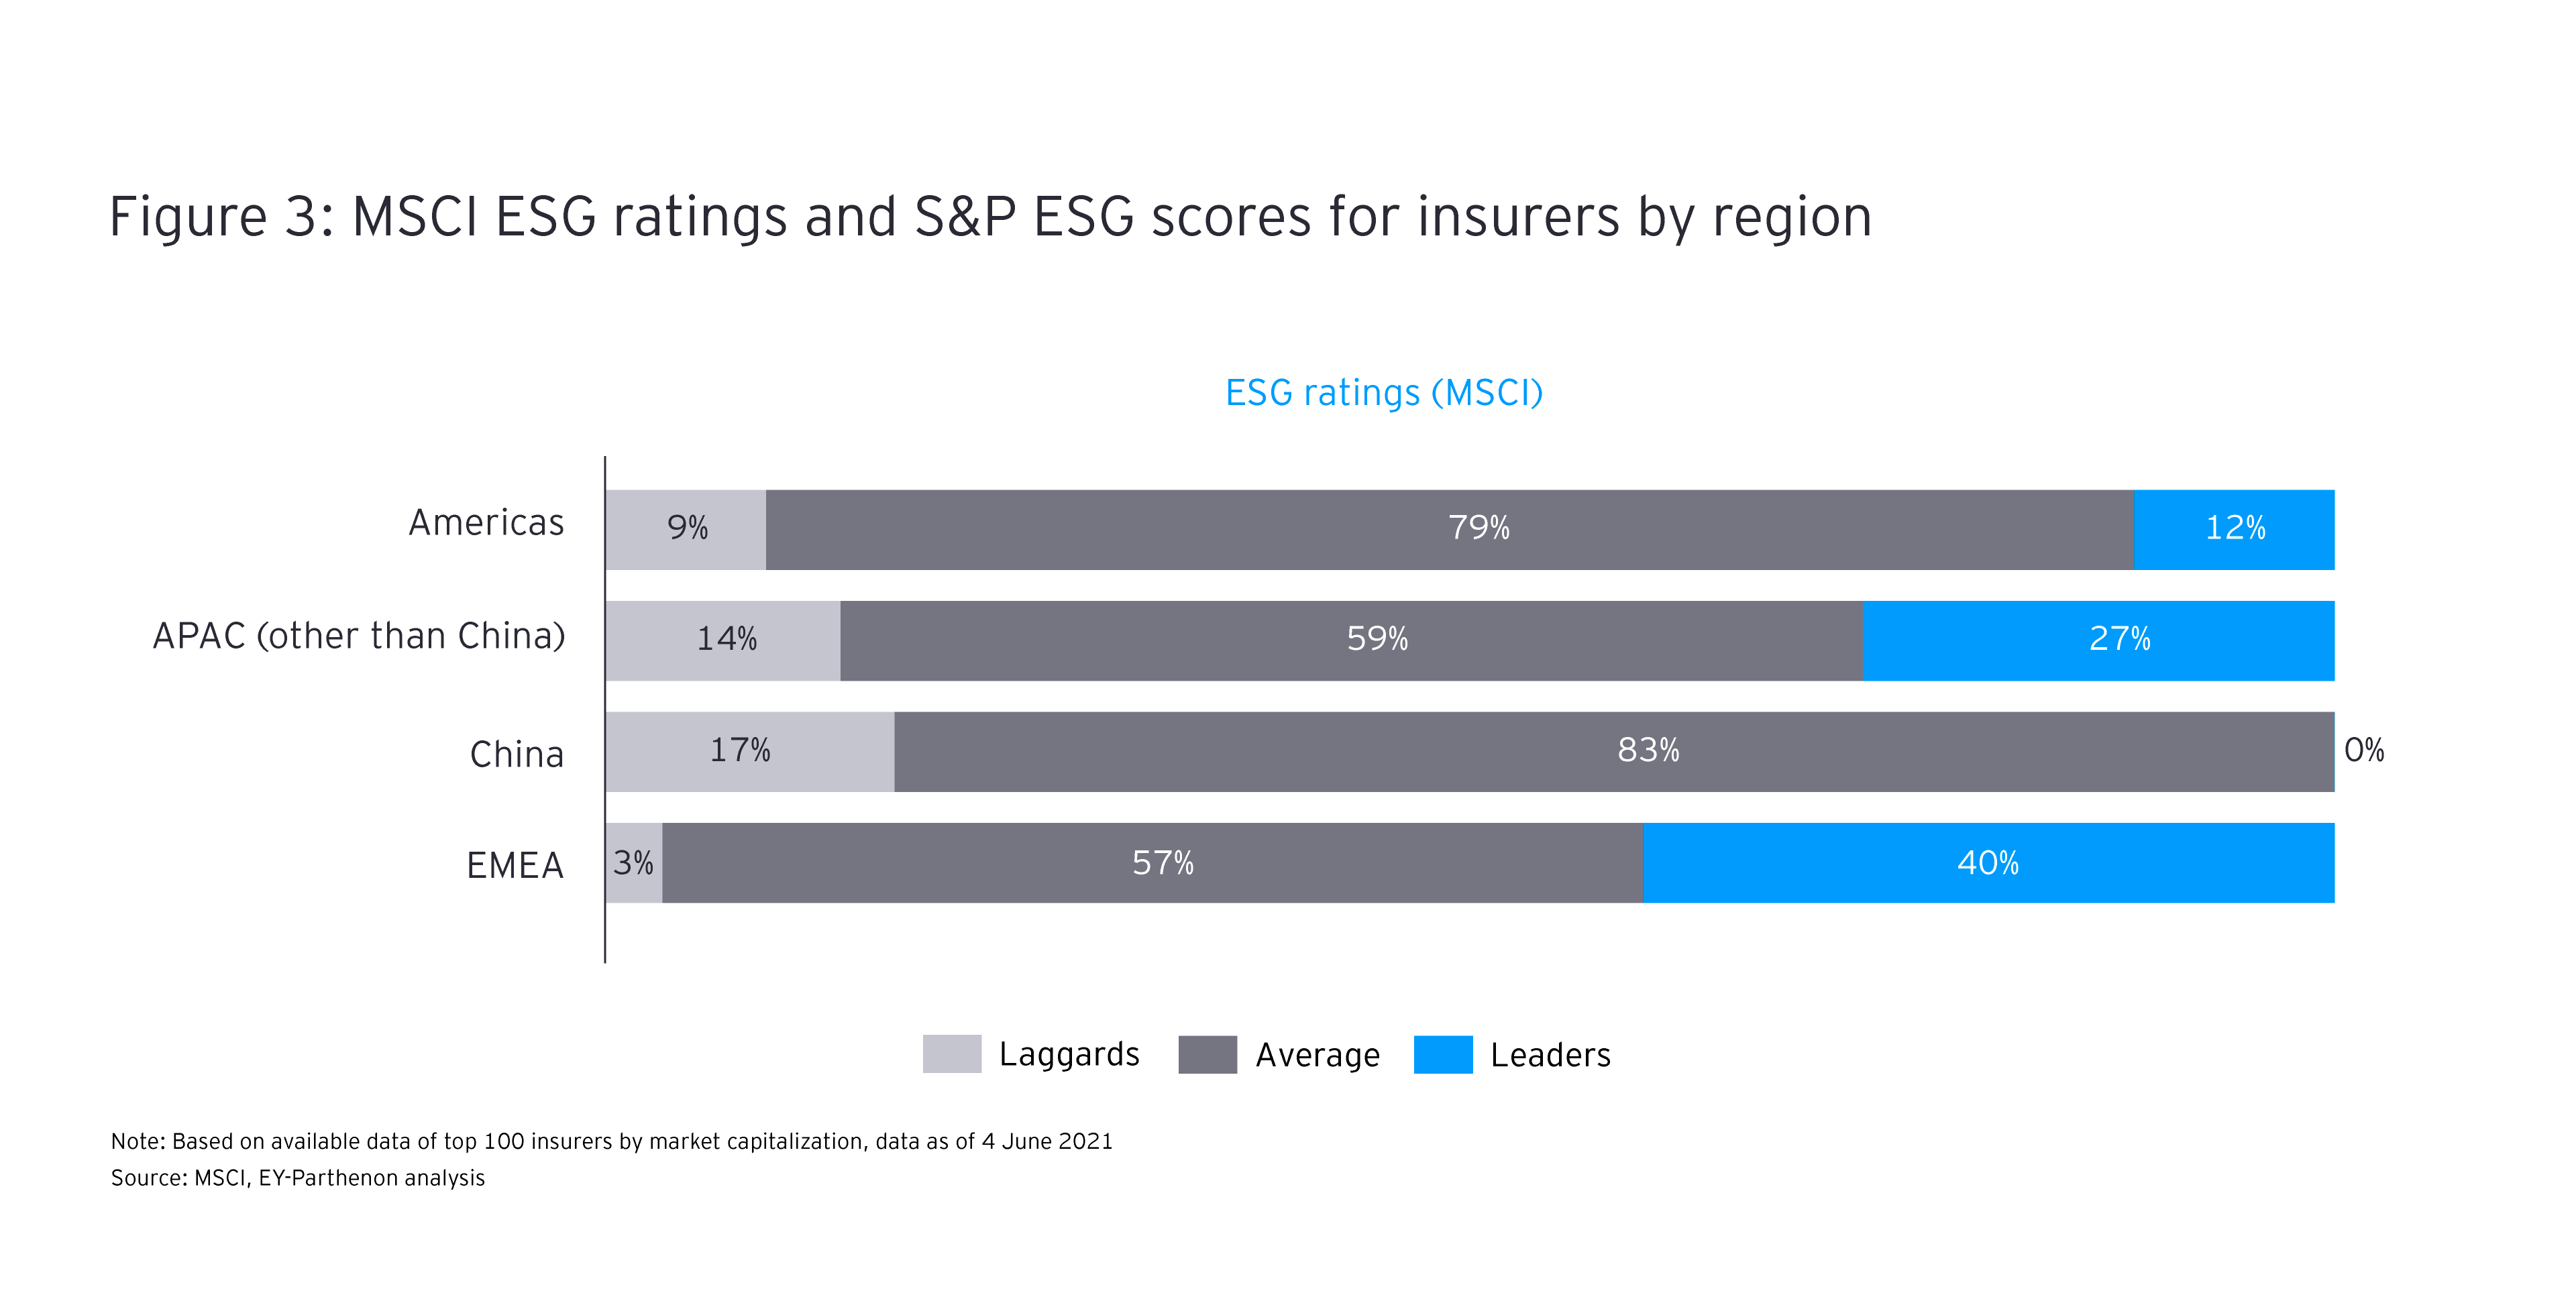 MSCI ESG ratings and S&P ESG scores for insurers by region